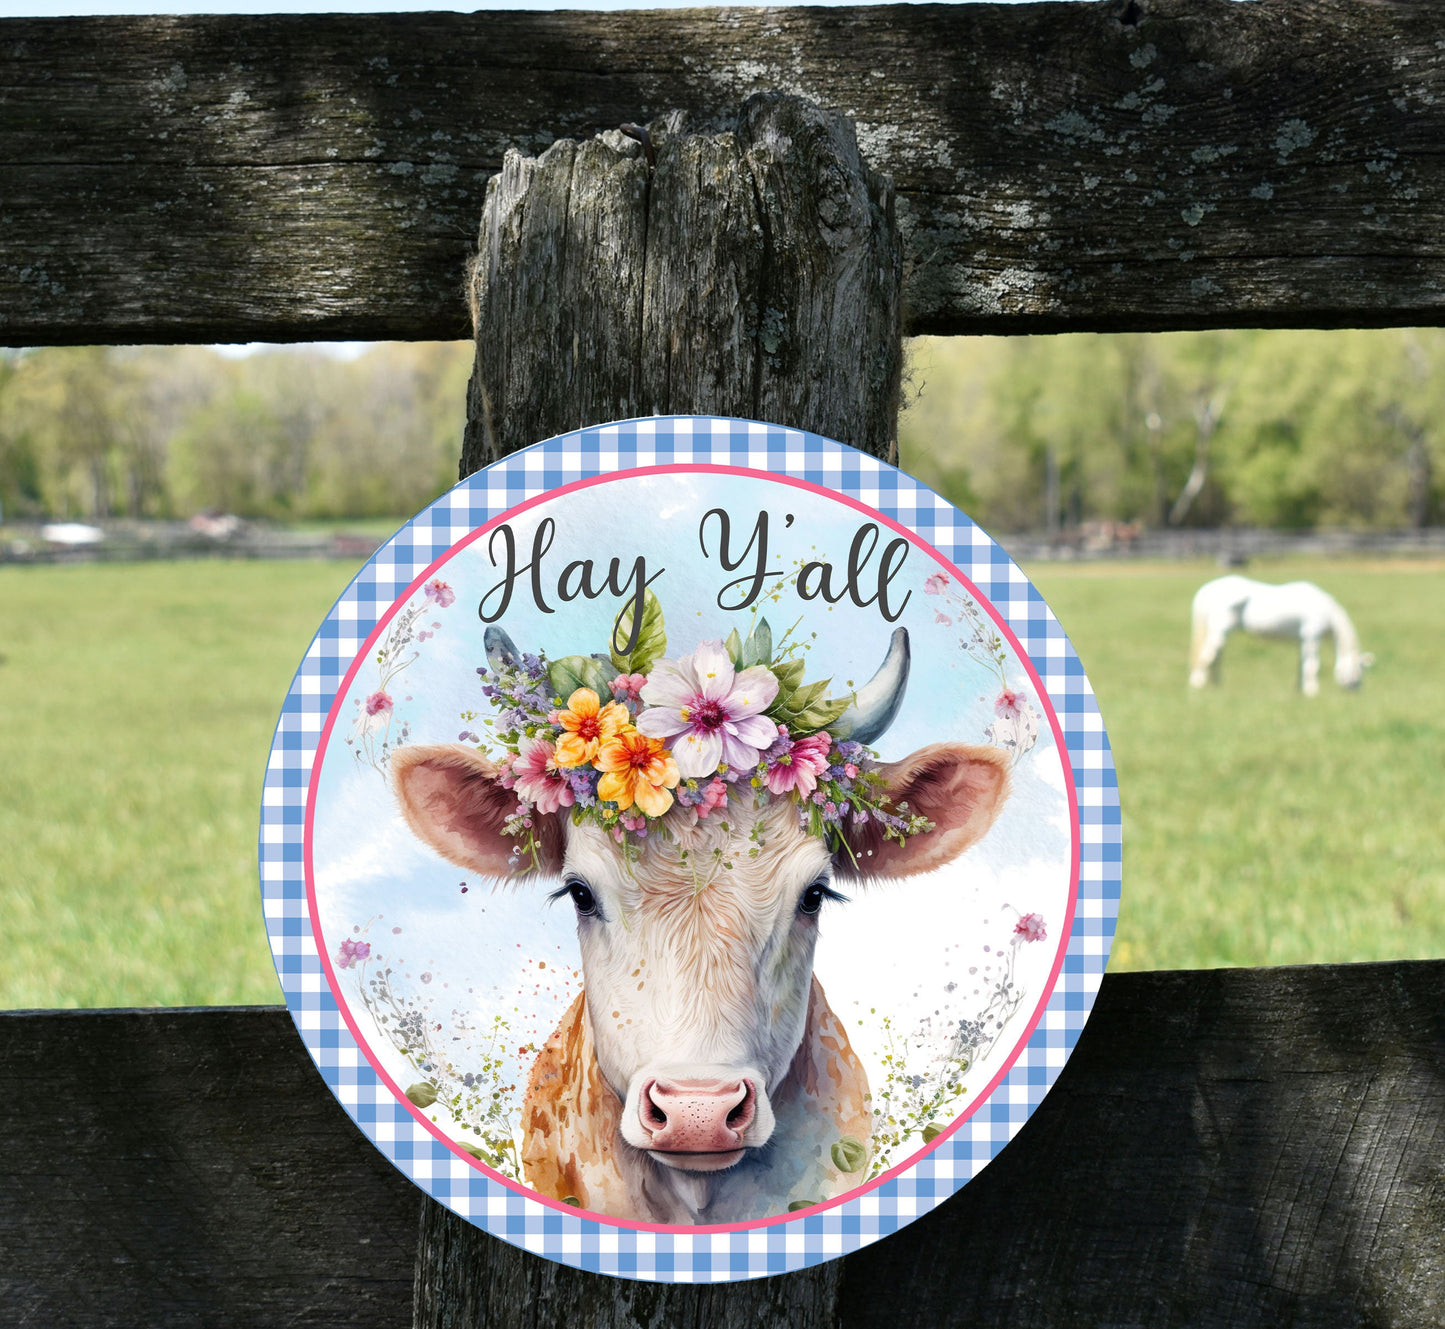 Hay Y'all Flower Cow Round Printed Handmade Wood Sign Farmhouse Door Hanger Wreath Sign